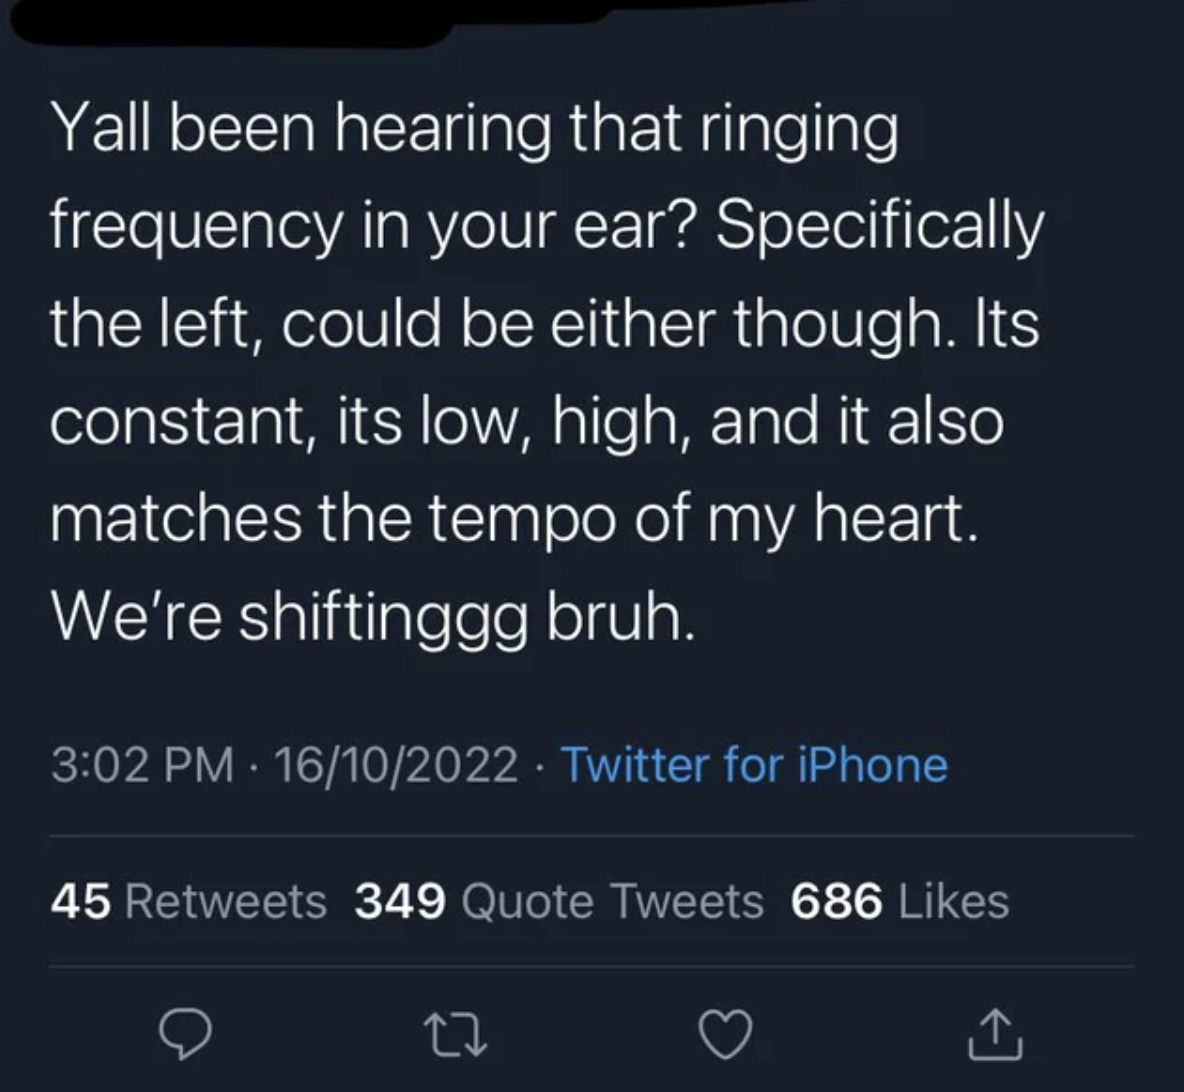 Crazy People of Facebook - atmosphere - Yall been hearing that ringing frequency in your ear? Specifically the left, could be either though. Its constant, its low, high, and it also matches the tempo of my heart. We're